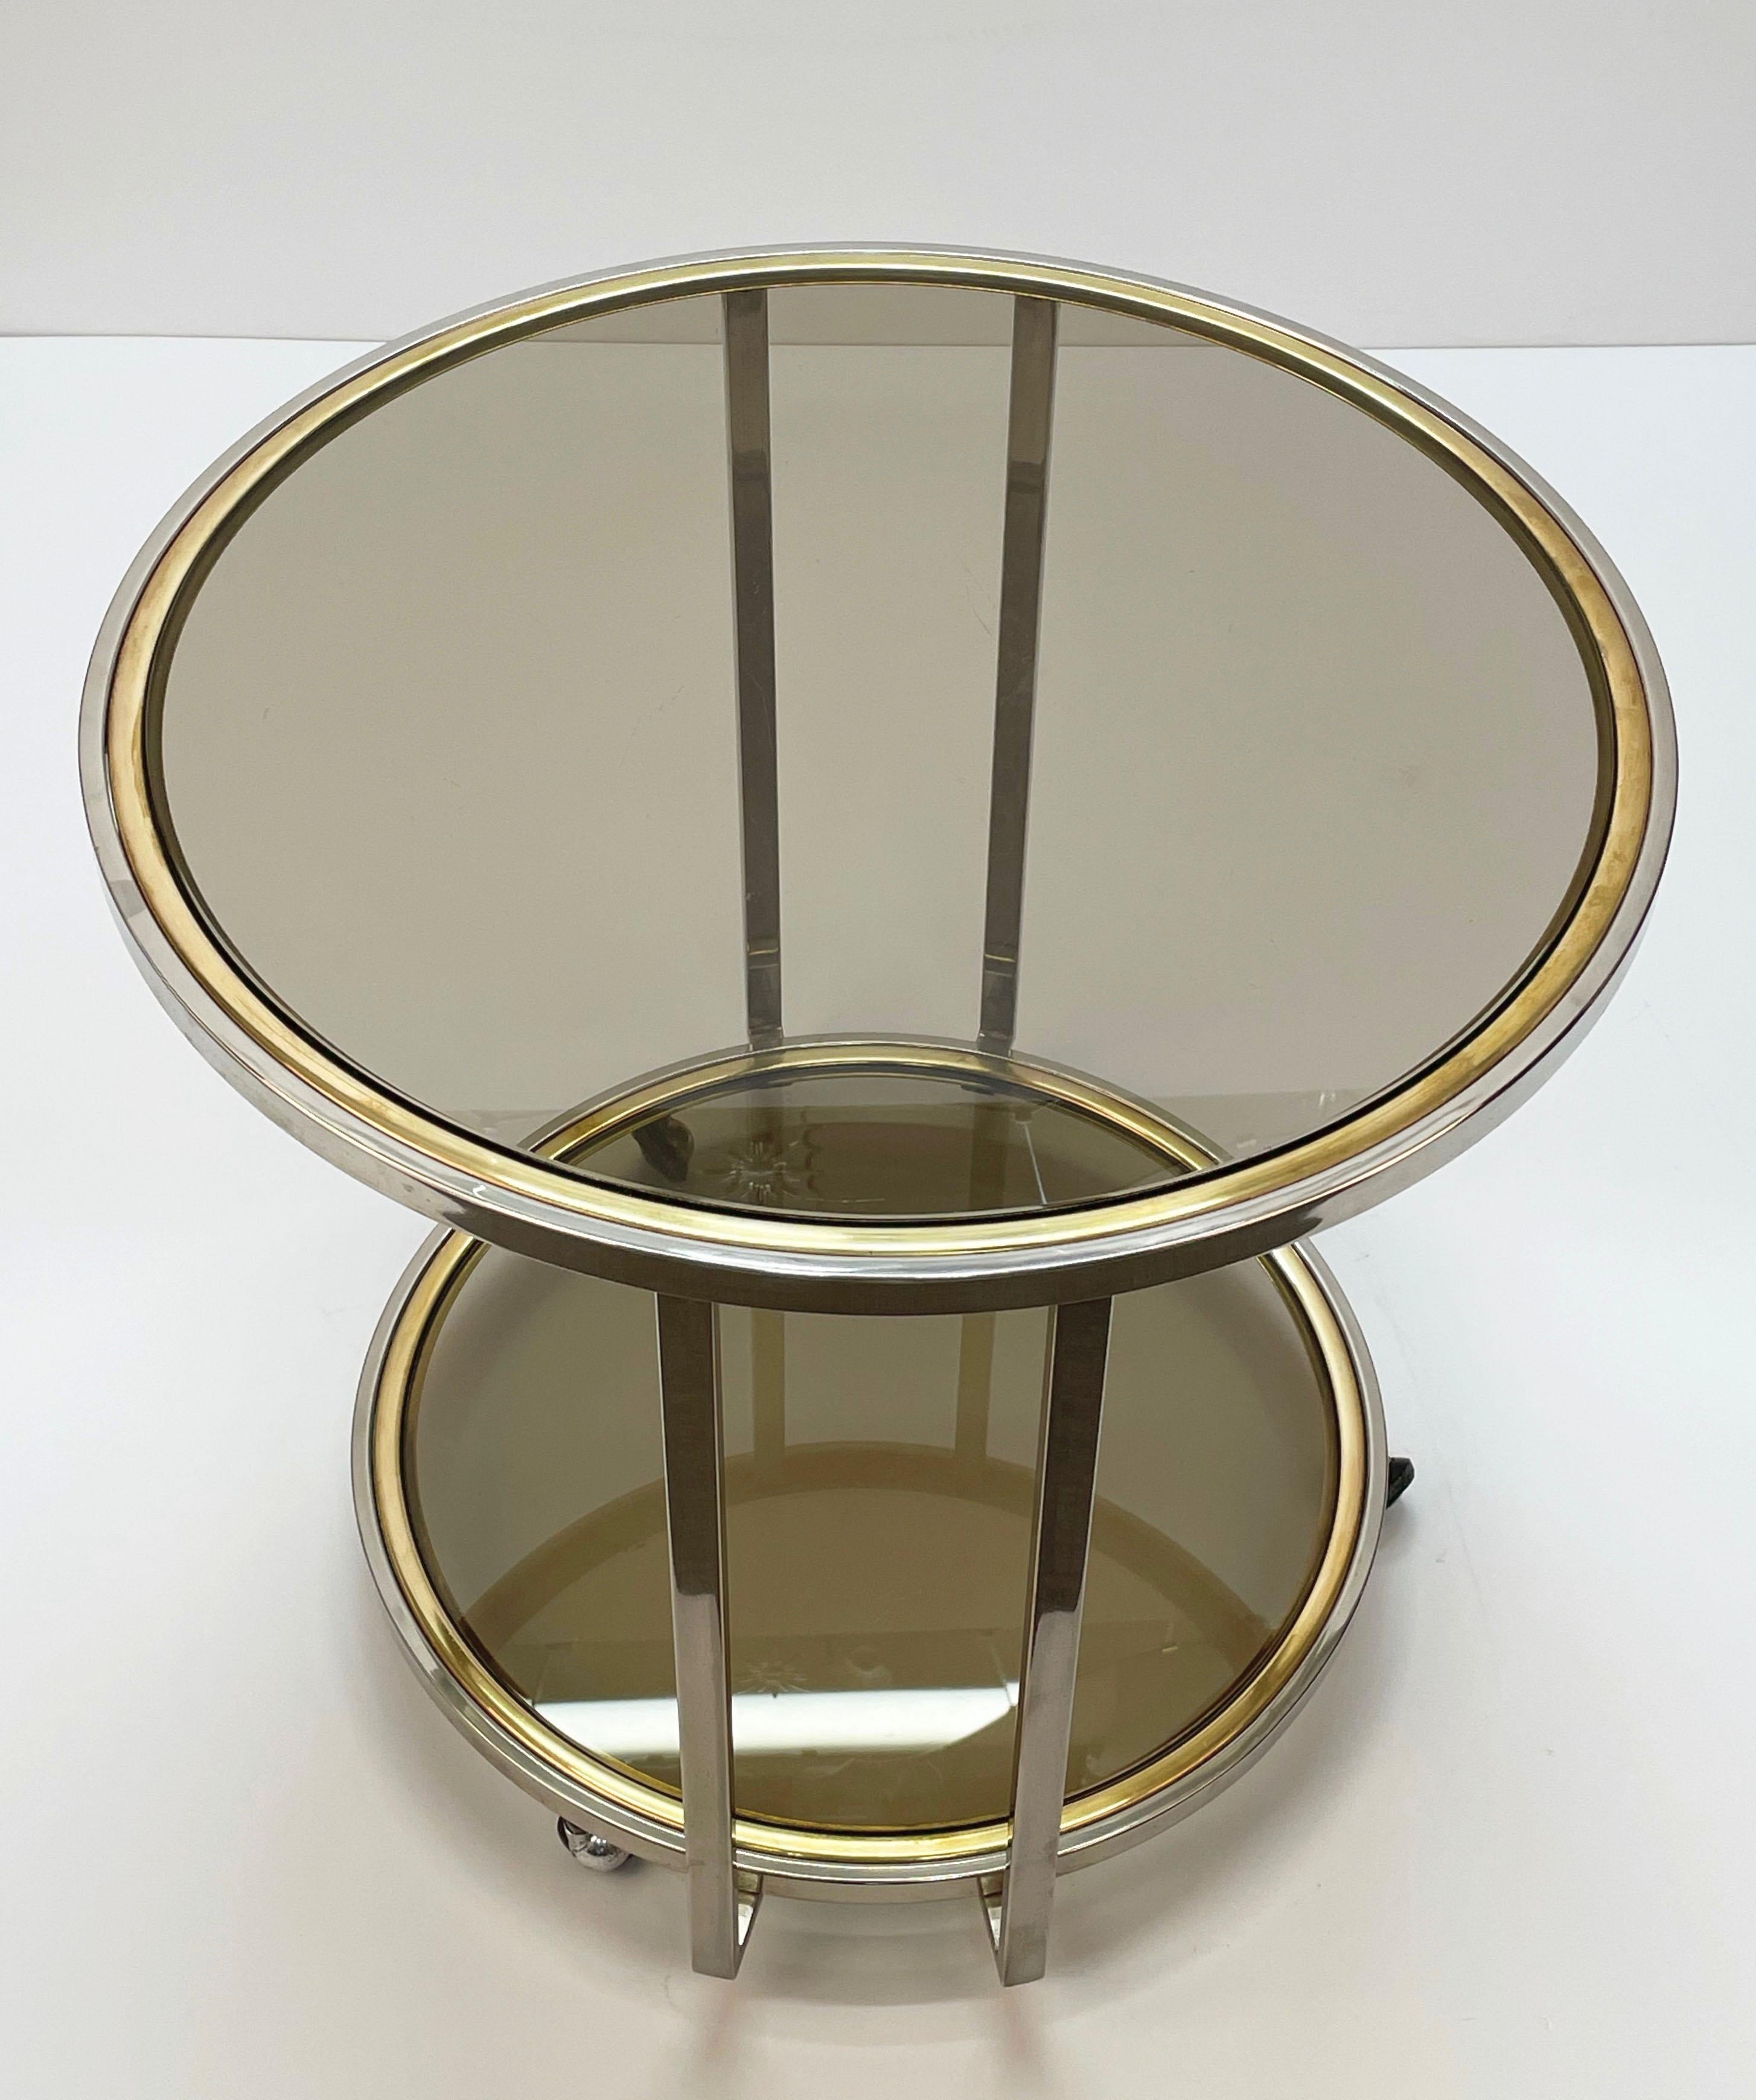 Midcentury Brass and Chrome and Glass Italian Coffee Table after Romeo Rega 1970 For Sale 8